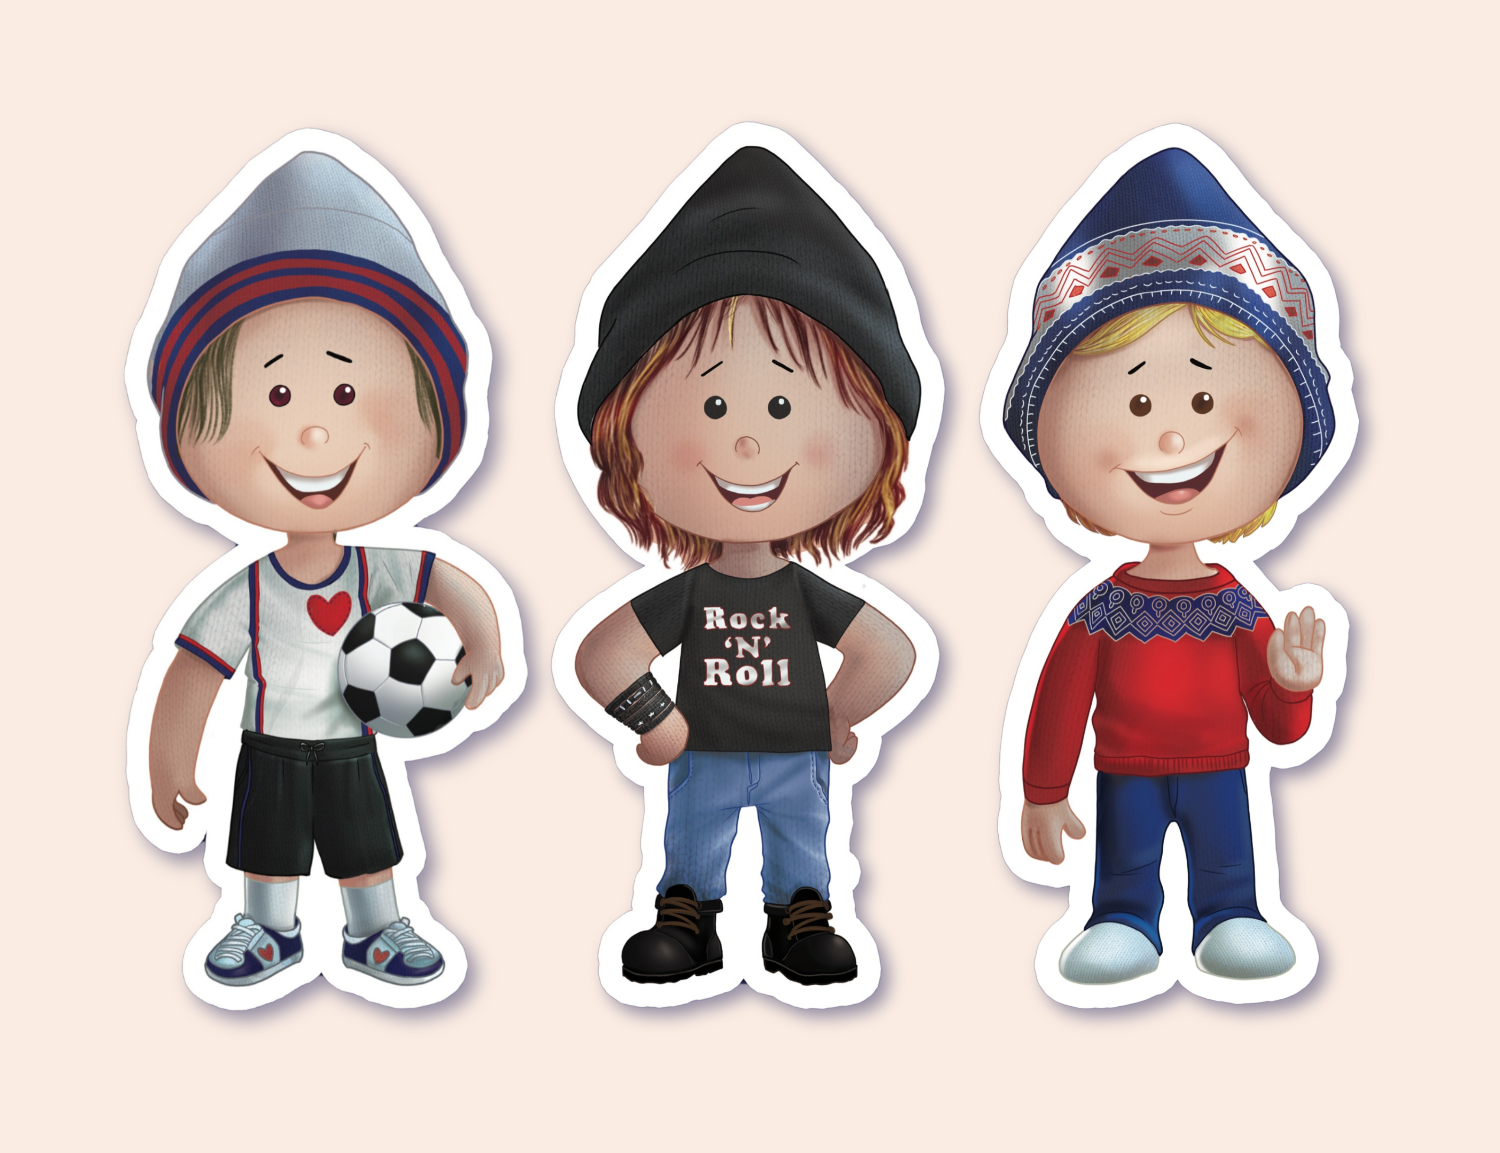 A set of three gender-neutral stickers depicting children in various outfits: one in a soccer uniform holding a ball, another in a festive Nordic sweater and hat, and the third wearing a "Rock n' Roll" shirt, jeans, and a black beanie. Each sticker has a white border indicating it's peelable.